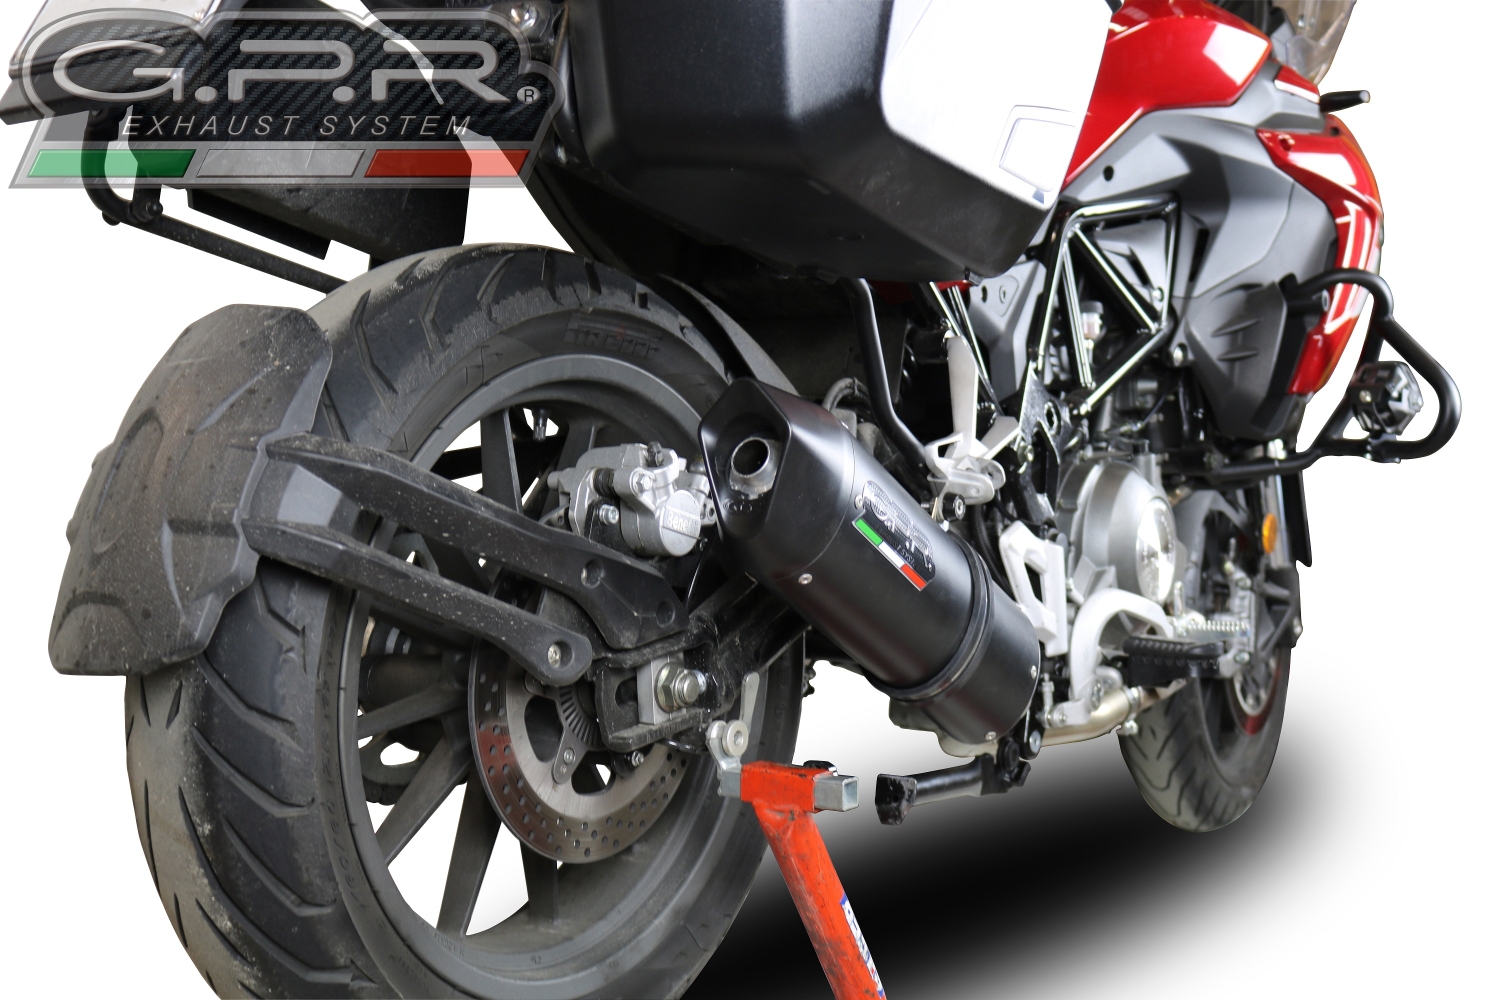 Exhaust system compatible with Benelli Trk 502 2021-2024, Furore Evo4 Nero, Homologated legal slip-on exhaust including removable db killer, link pipe and catalyst 